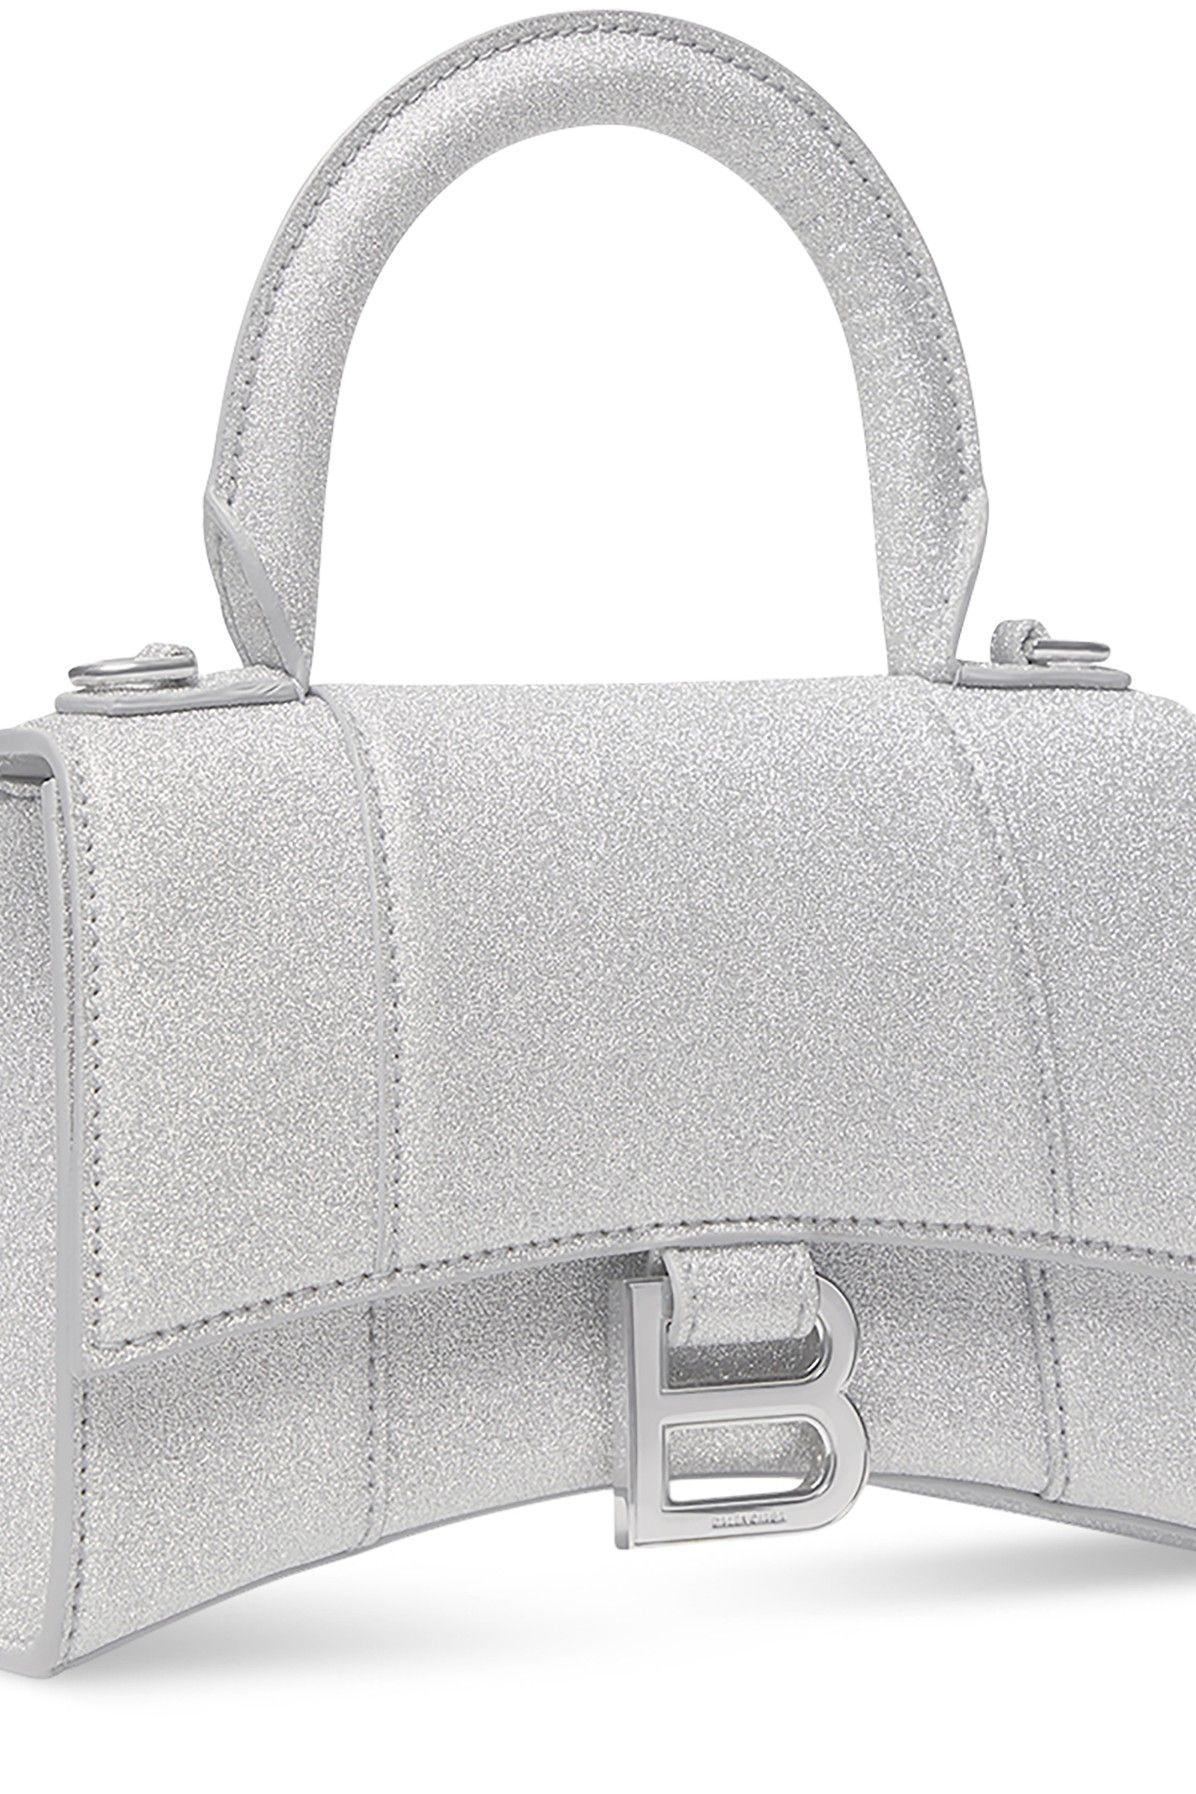 Balenciaga Hourglass Top Handle Bag XS Sparking Material Gray in Polyester  with Aged Siilver-tone - US